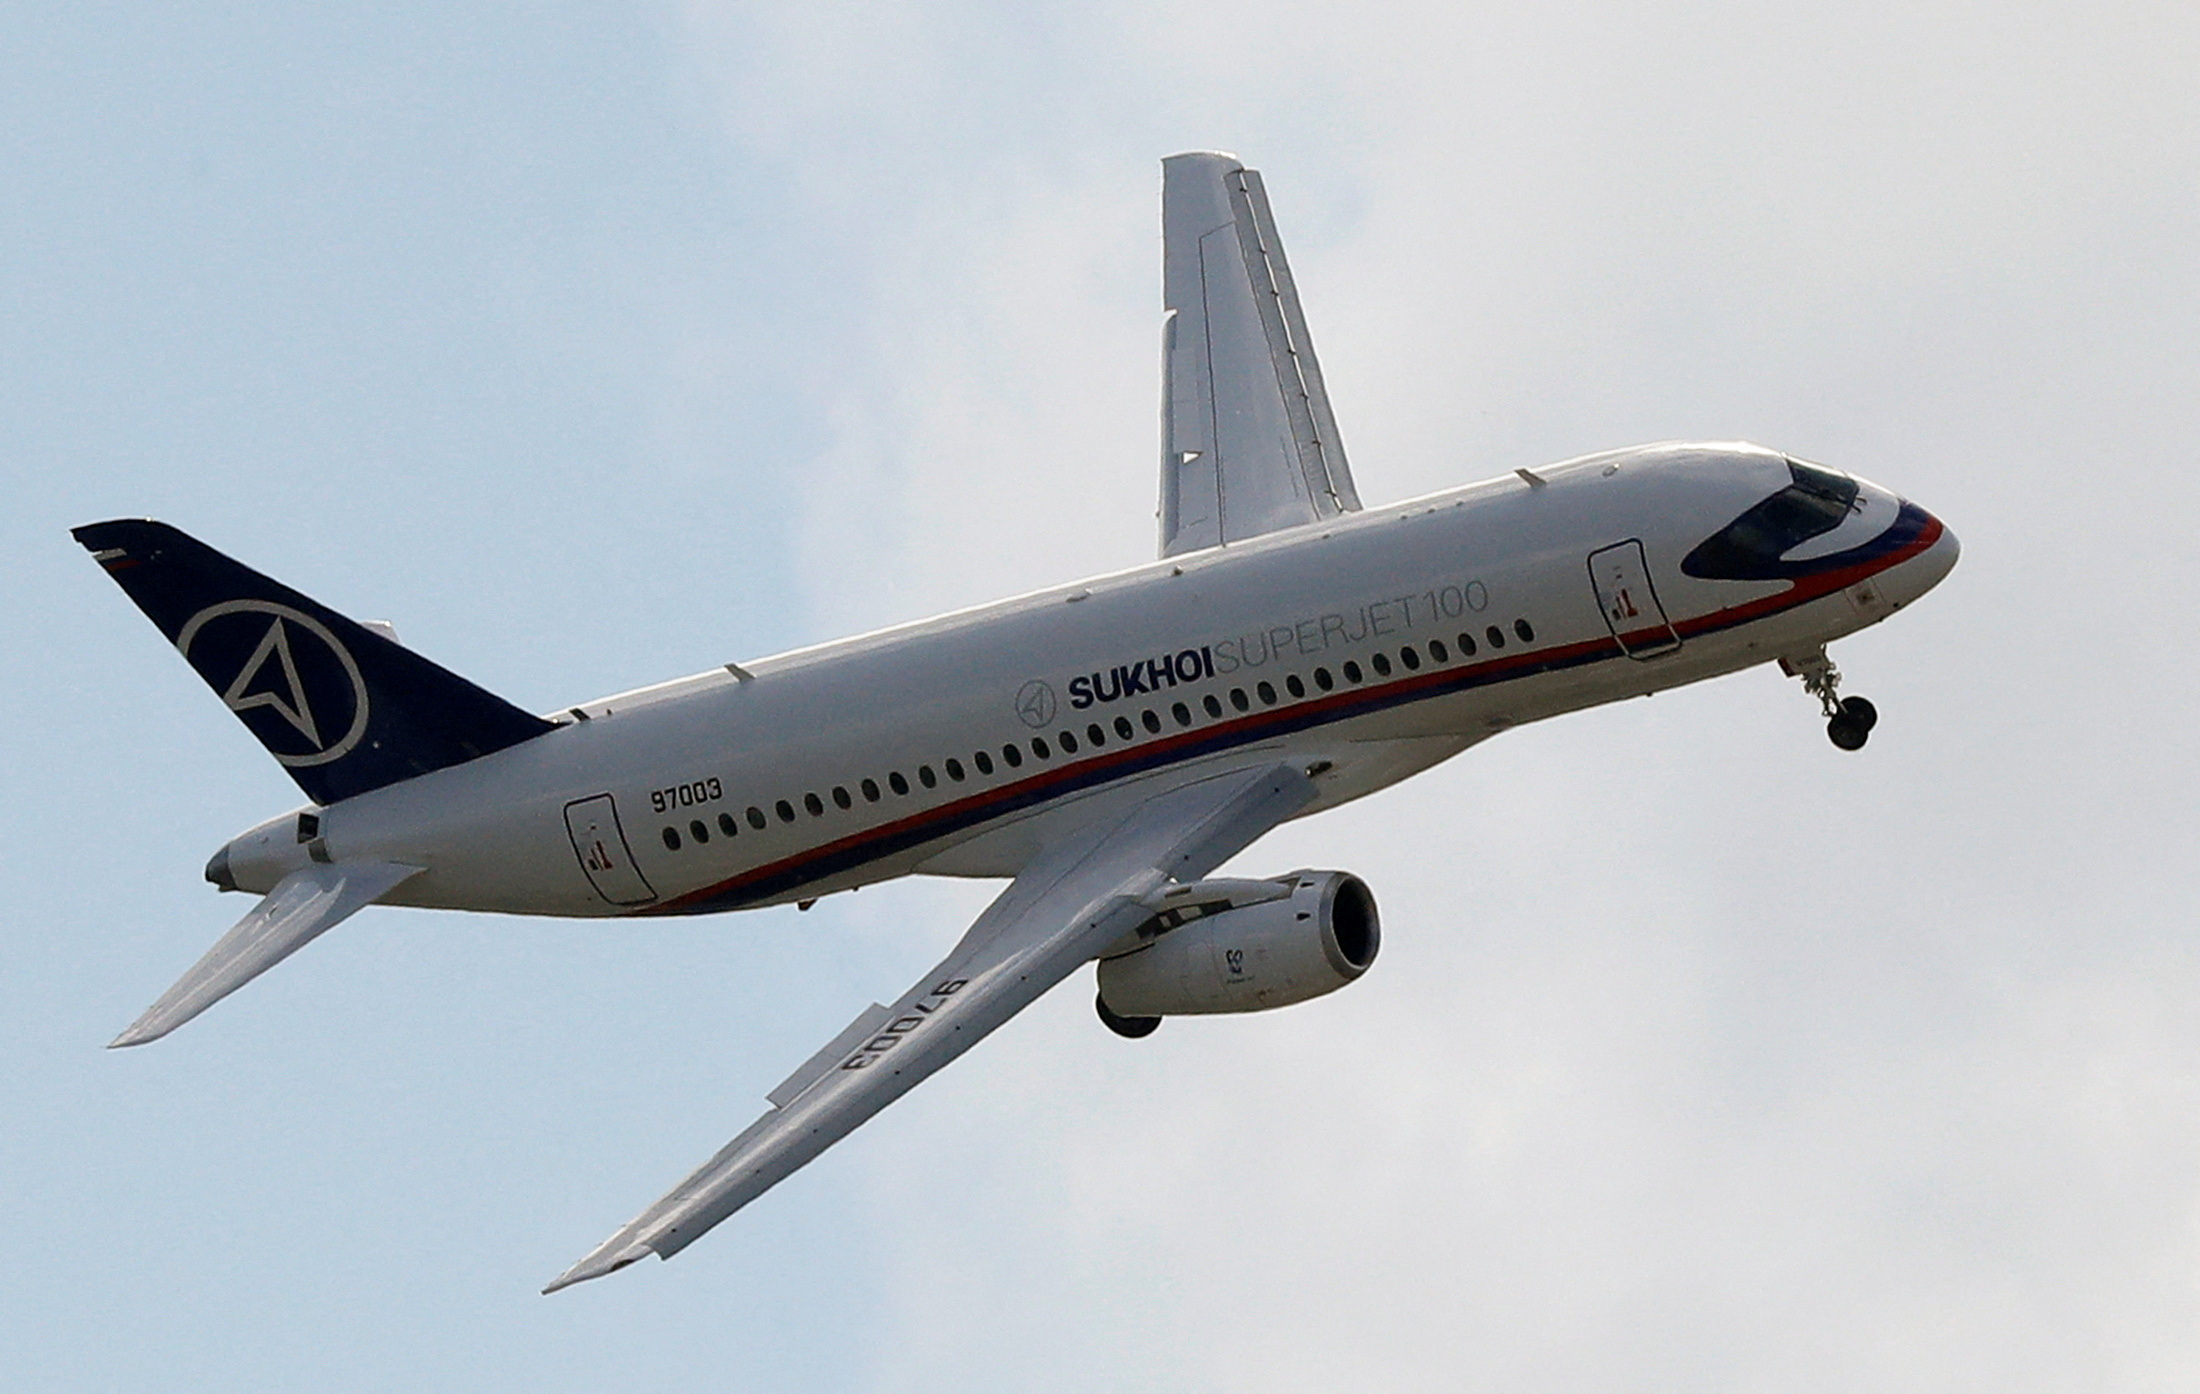 A Sukhoi Superjet 100 regional jet performs during a demonstration flight at the MAKS 2017 air show in Zhukovsky